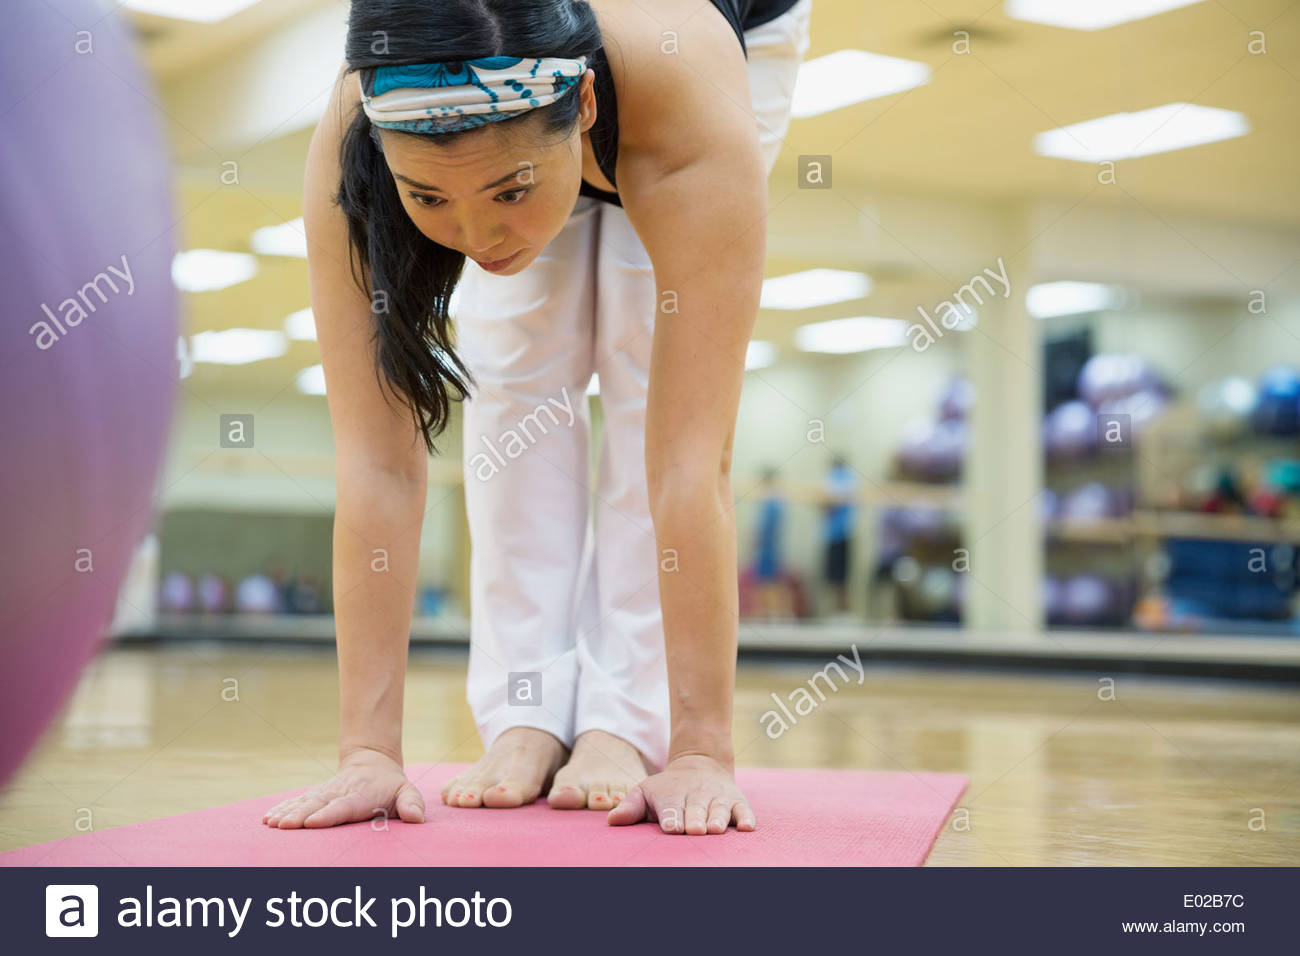 Woman practicing yoga at gym Stock Photo